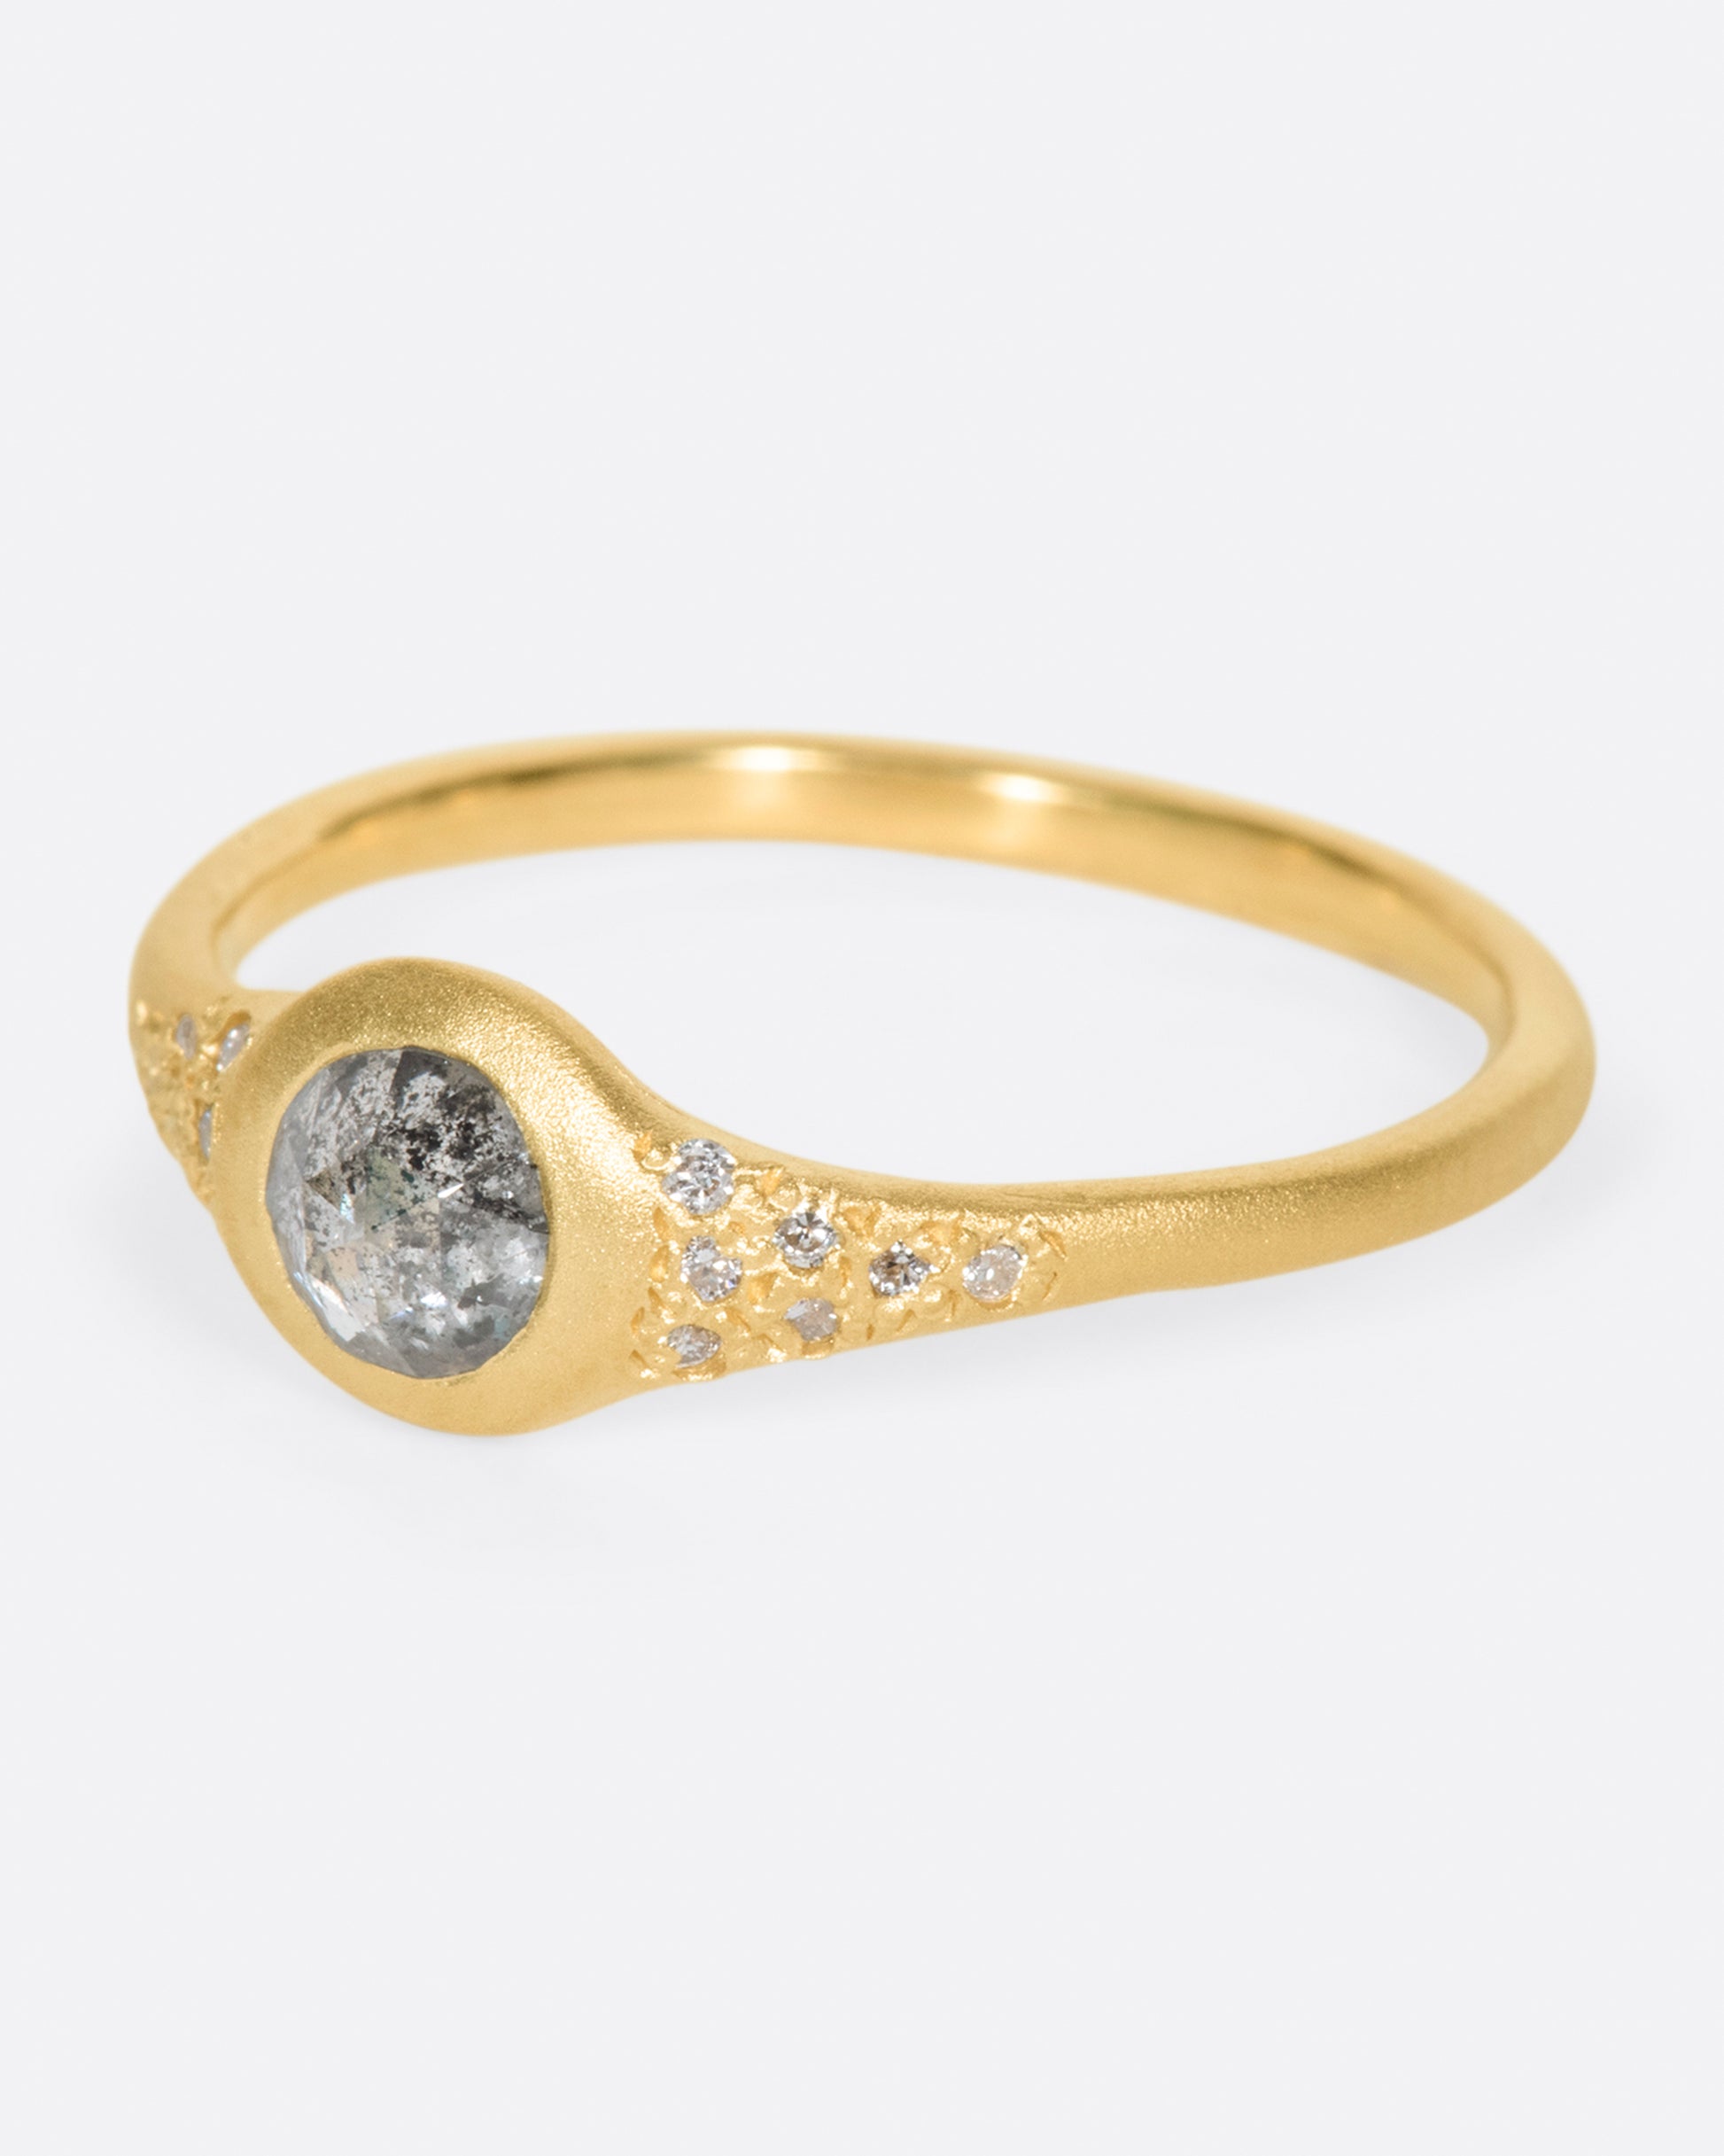 A brushed gold signet style ring with a salt and pepper diamond at its center and white diamond accents, shown from the side.